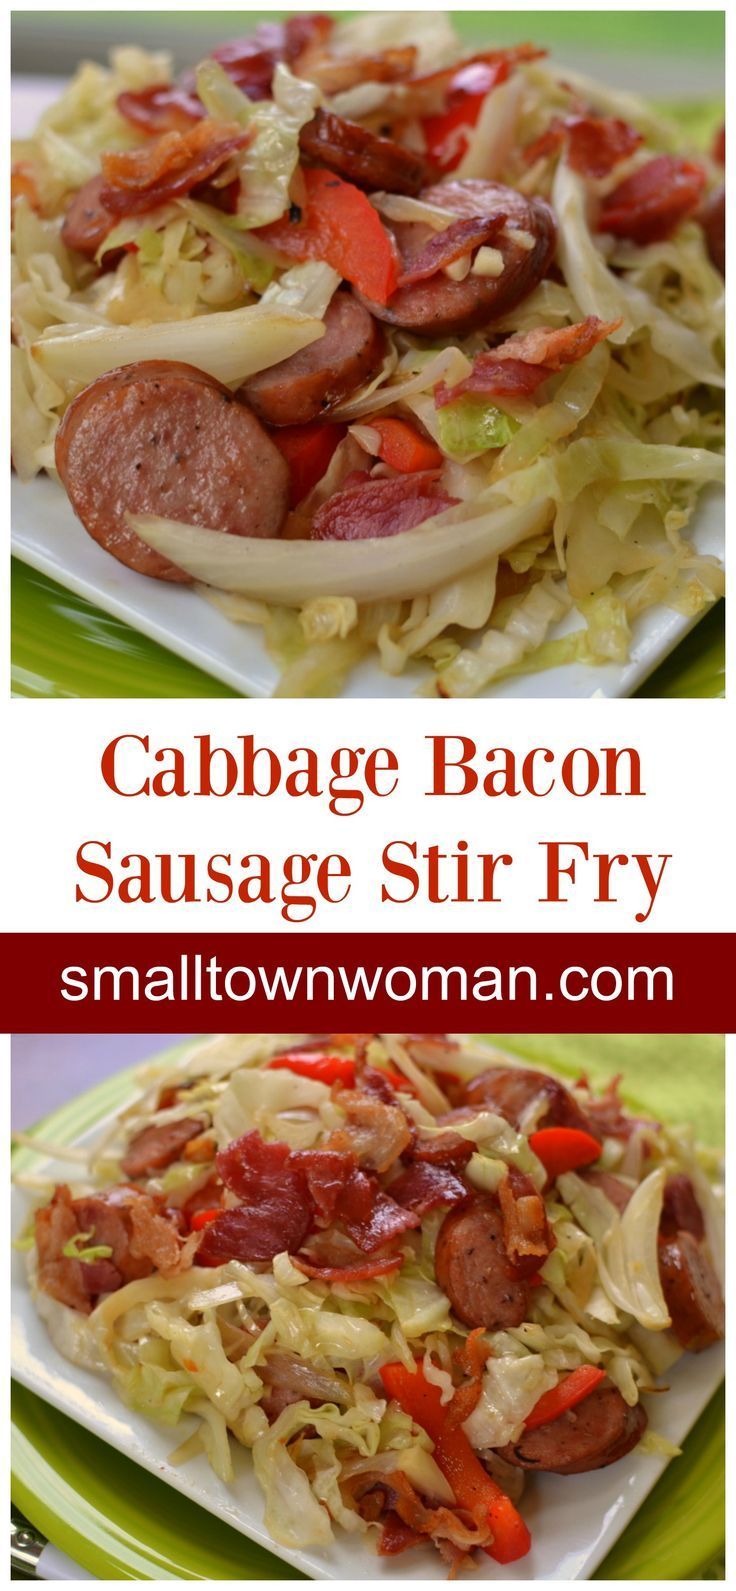 You are just a few minutes away from this delicious low carb Cabbage Bacon Sausage Stir Fry.  This scrumptious recipe keeps things simple with just a handful of ingredients. -   23 sausage recipes cabbage
 ideas